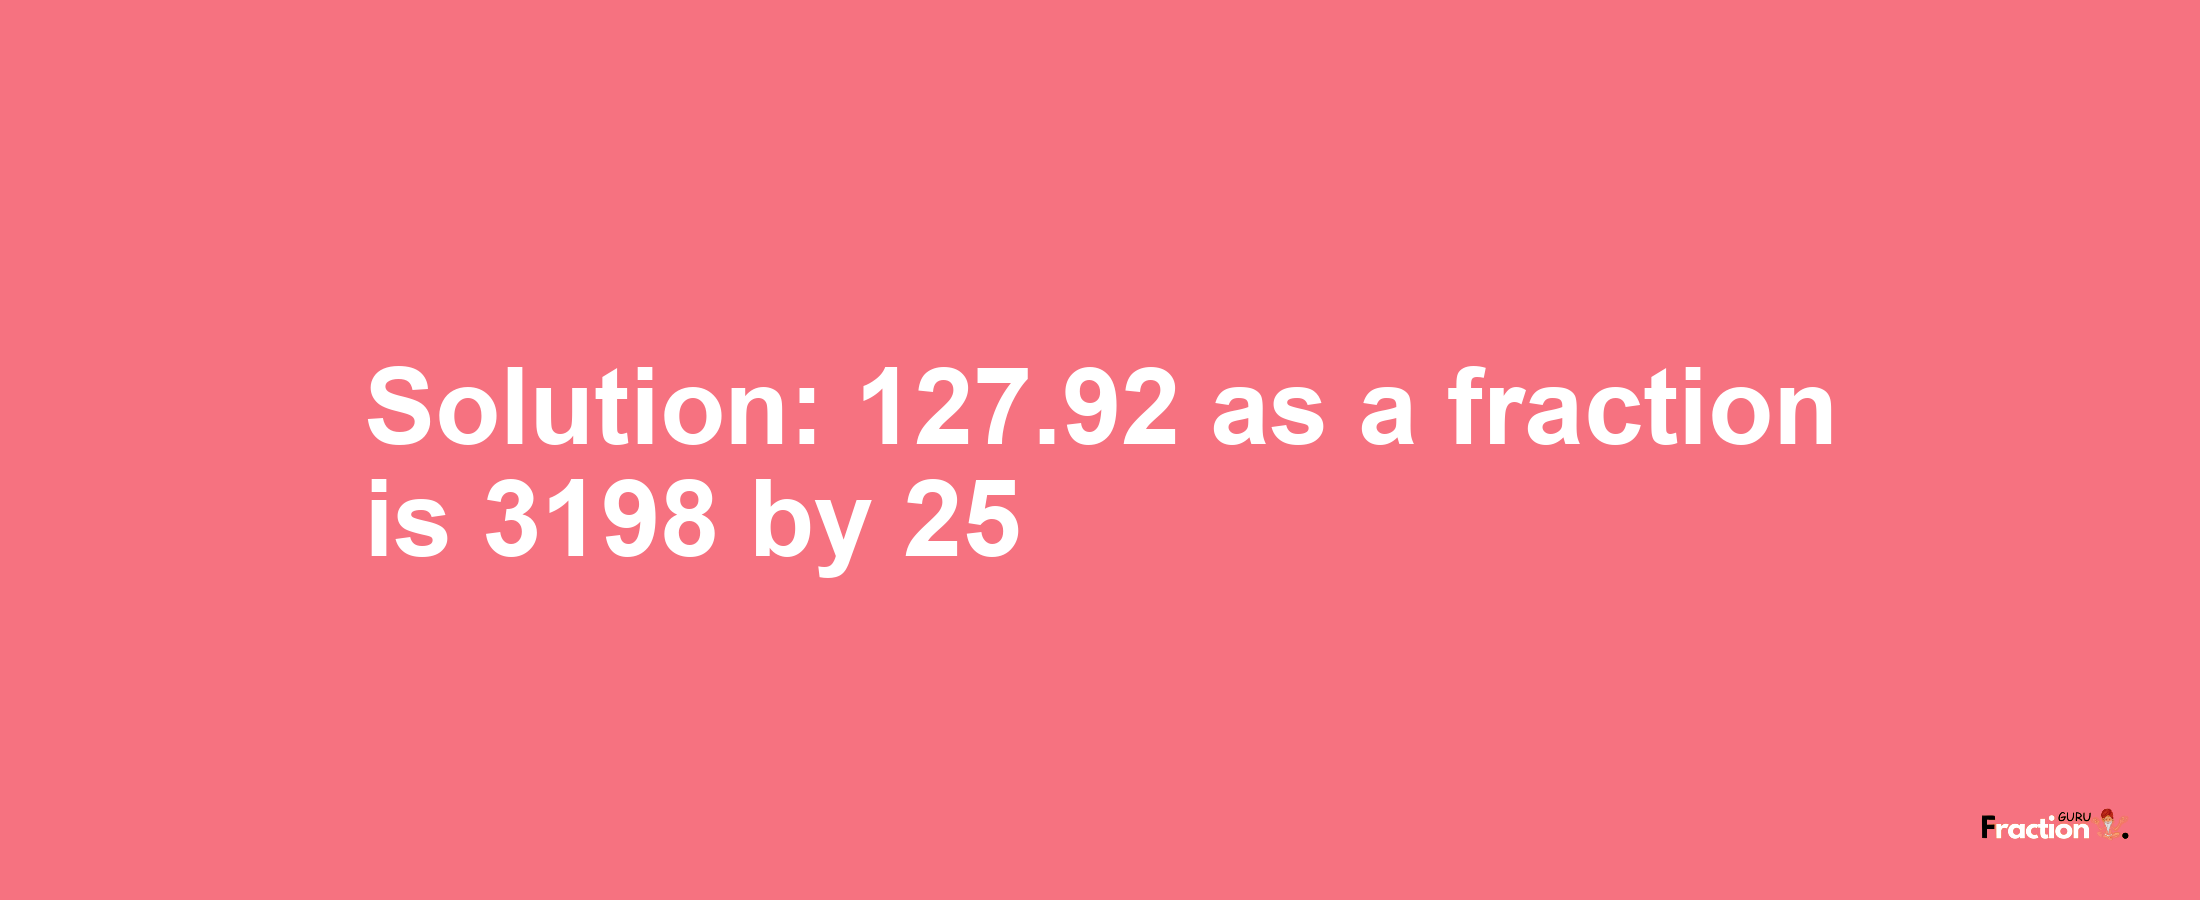 Solution:127.92 as a fraction is 3198/25